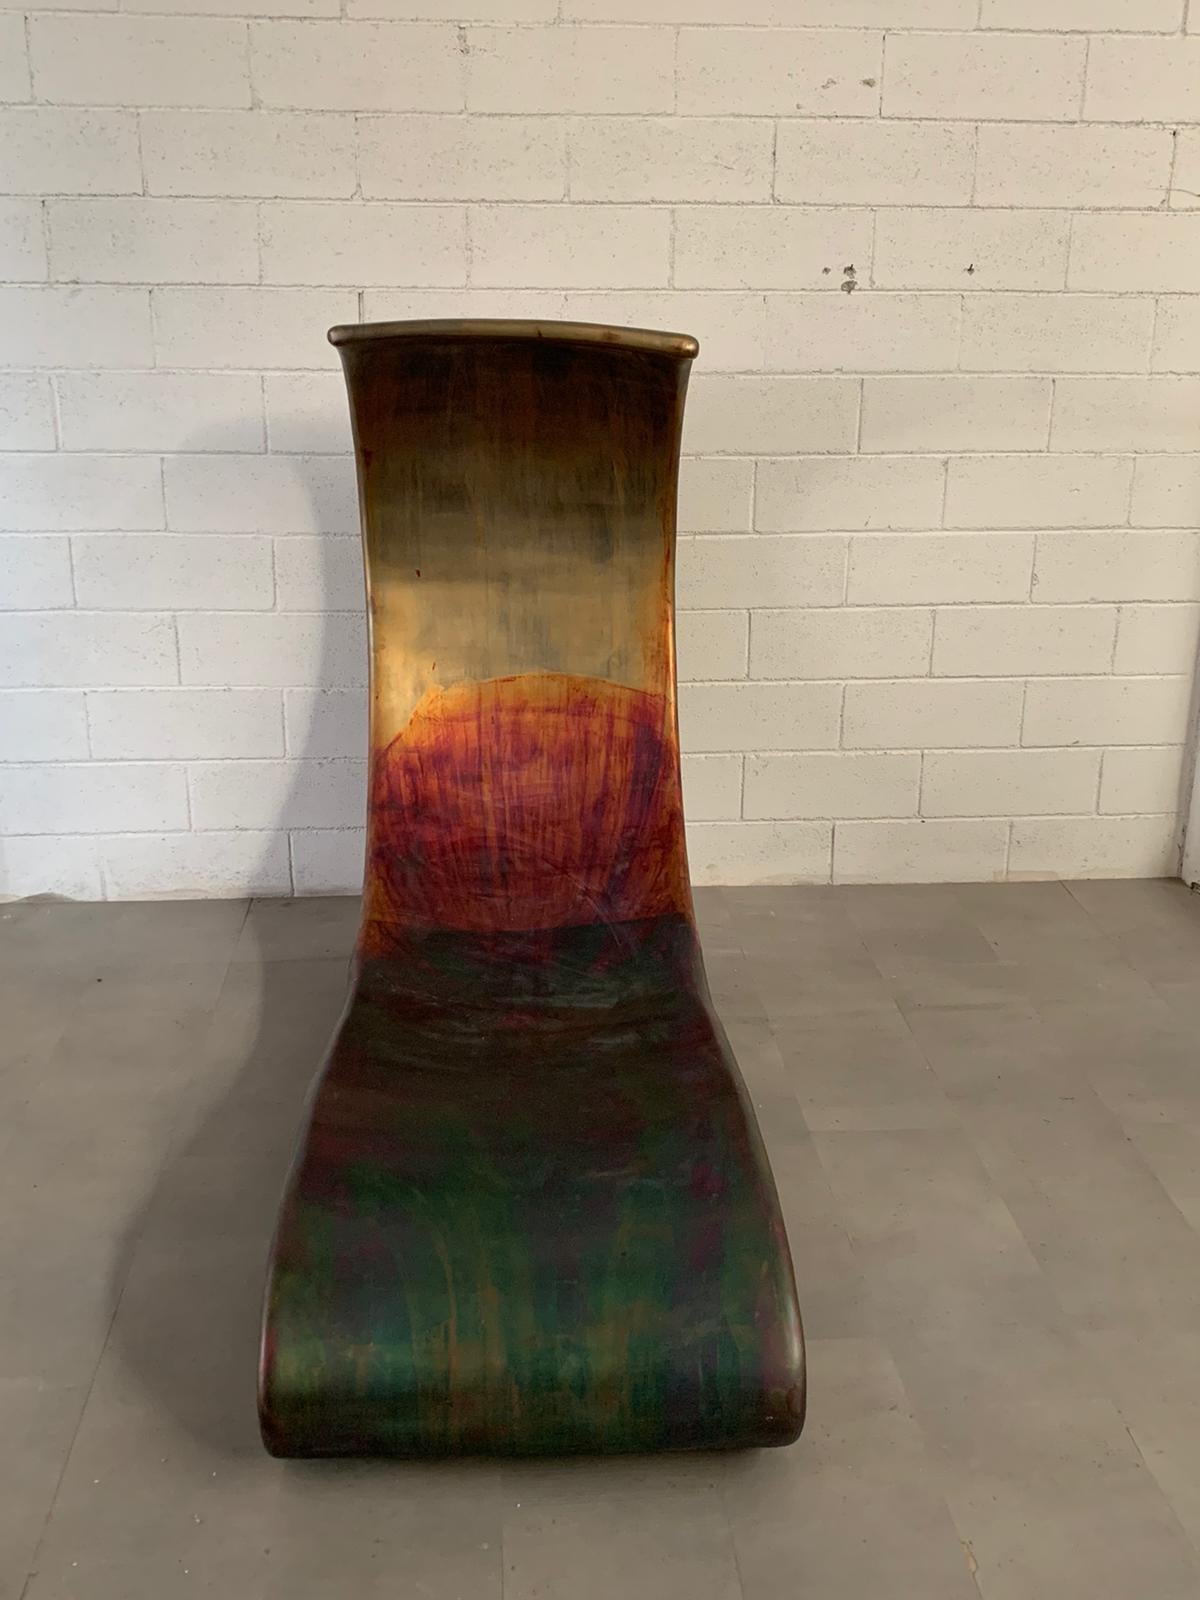 Fiberglass & Copper Chaise Lounge by Ravi Sing for Marco Polo Italia, 1990s For Sale 2